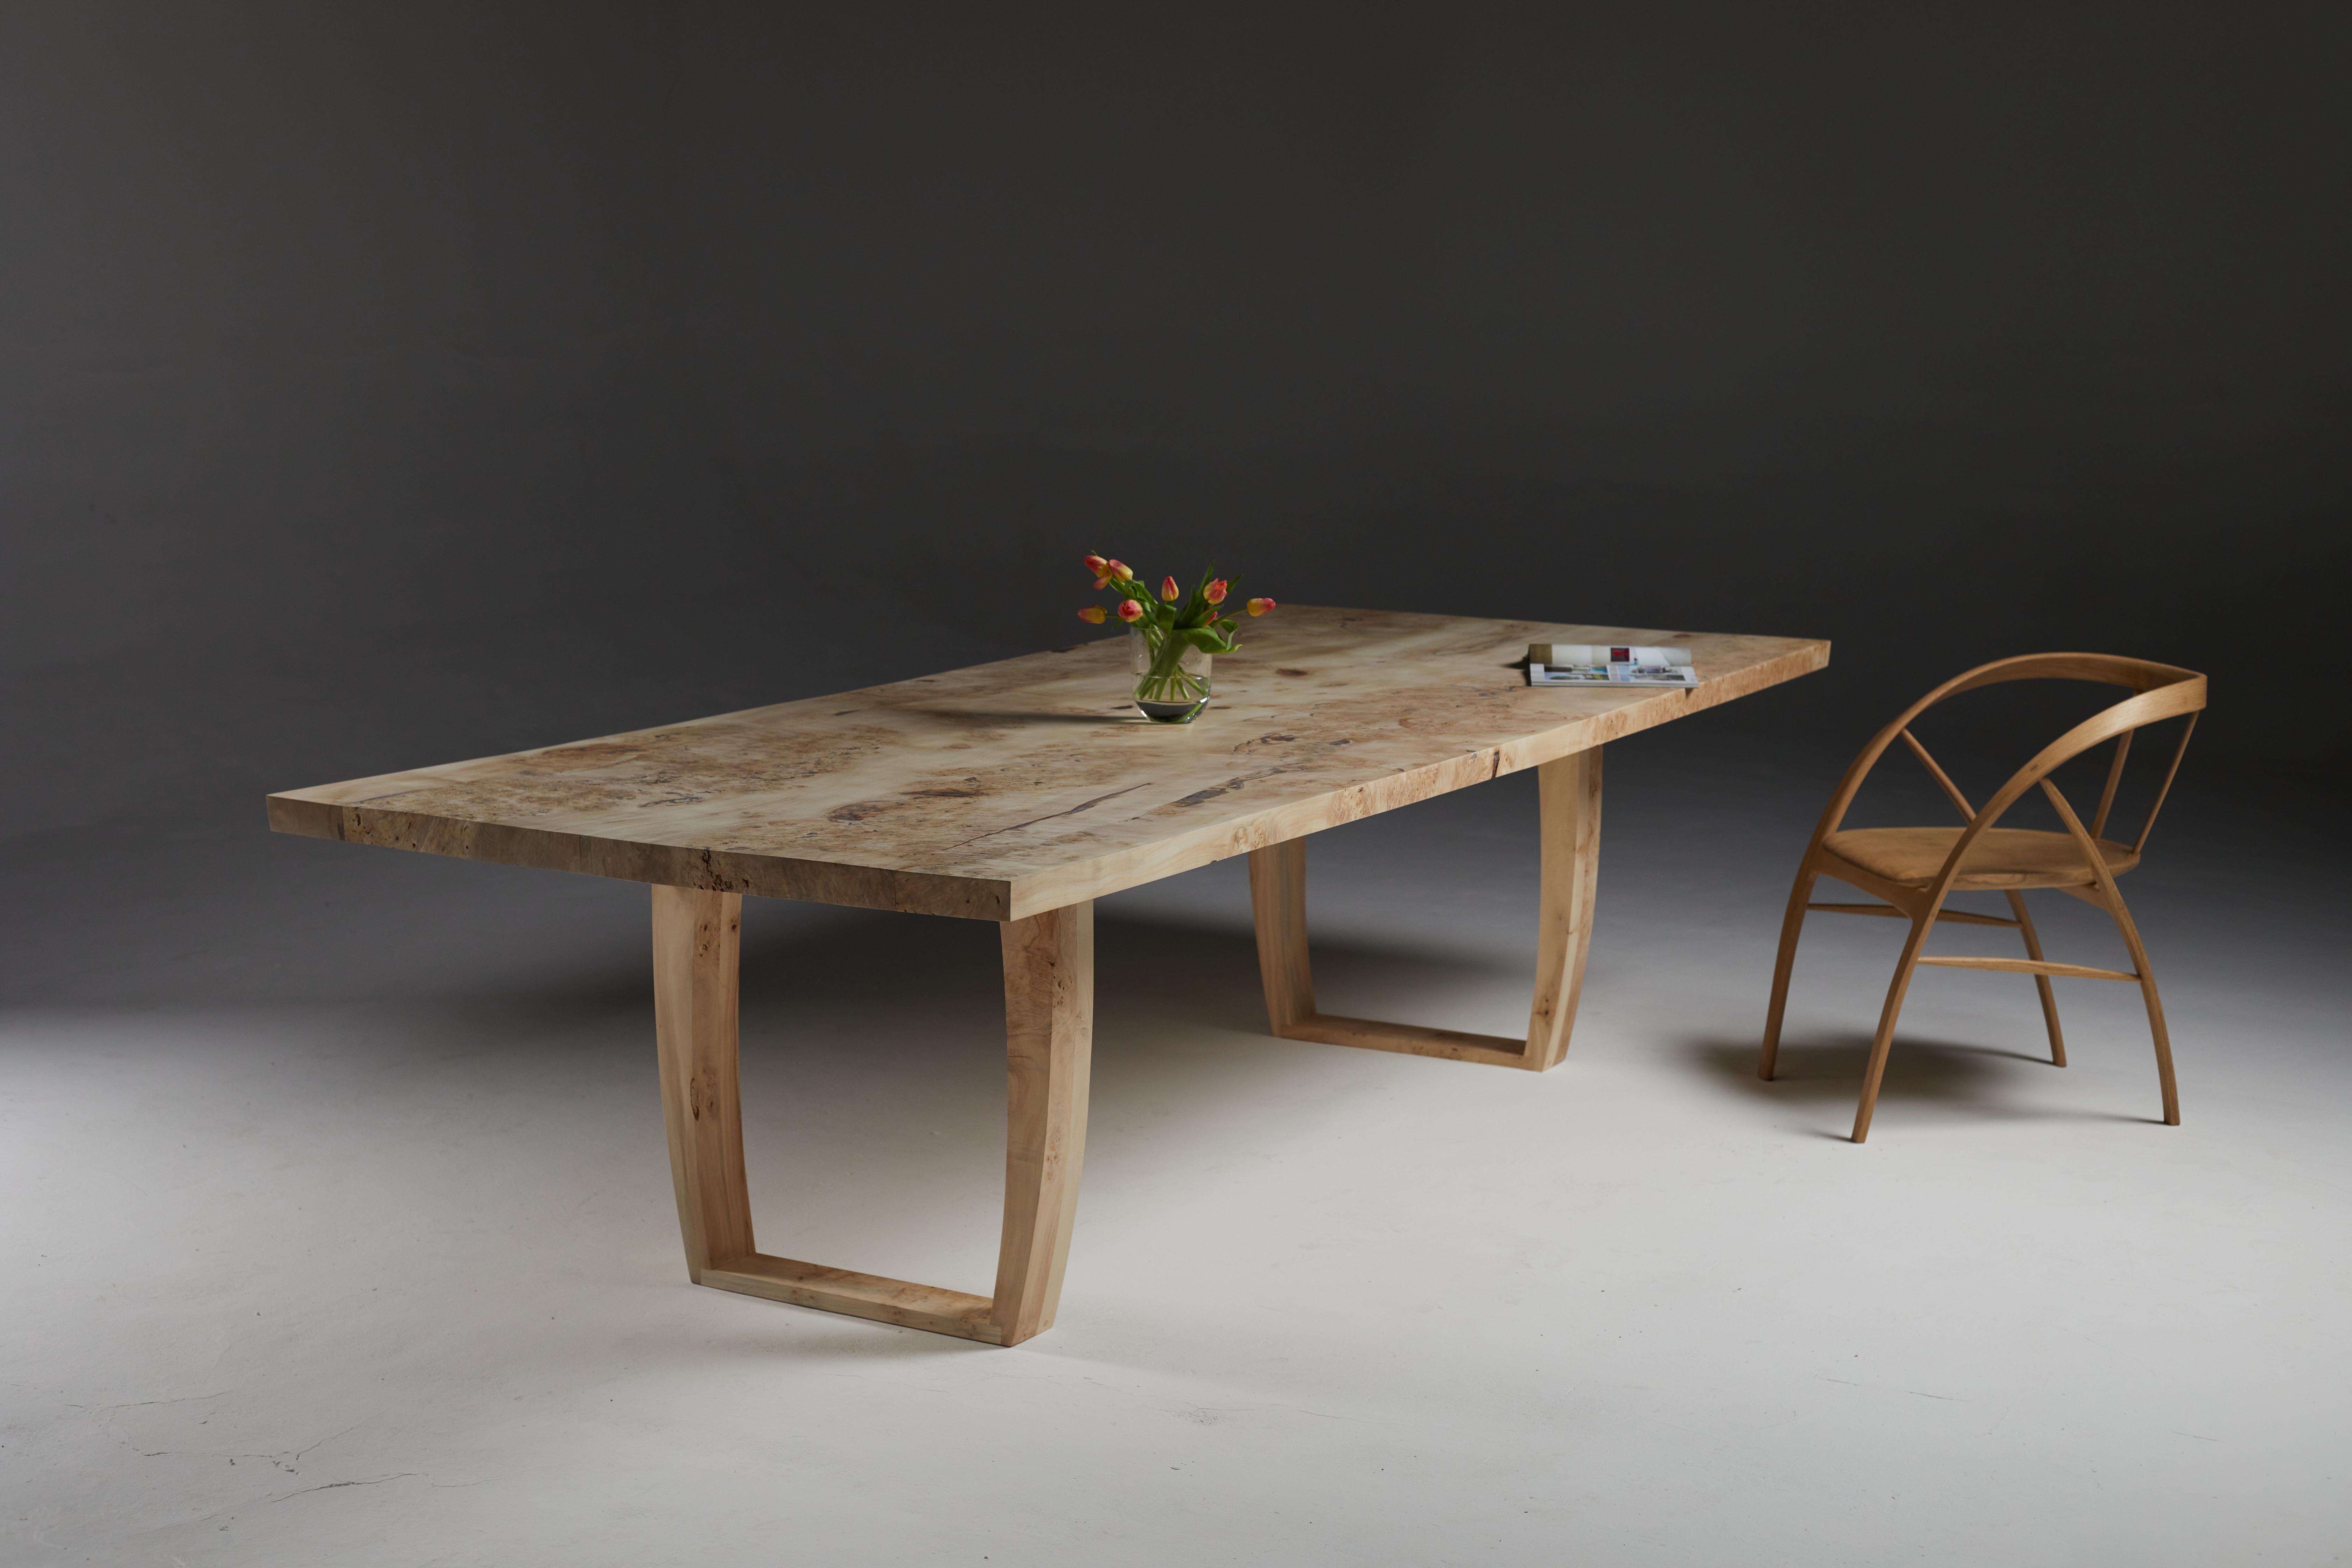 The dining table of solid burr horse chestnut is a unique piece made from horse chestnut that came from a tree that once stood in the village of Tetford in Lincolnshire (Robin Hood's county).
The solid tabletop is made from two slabs of burr horse